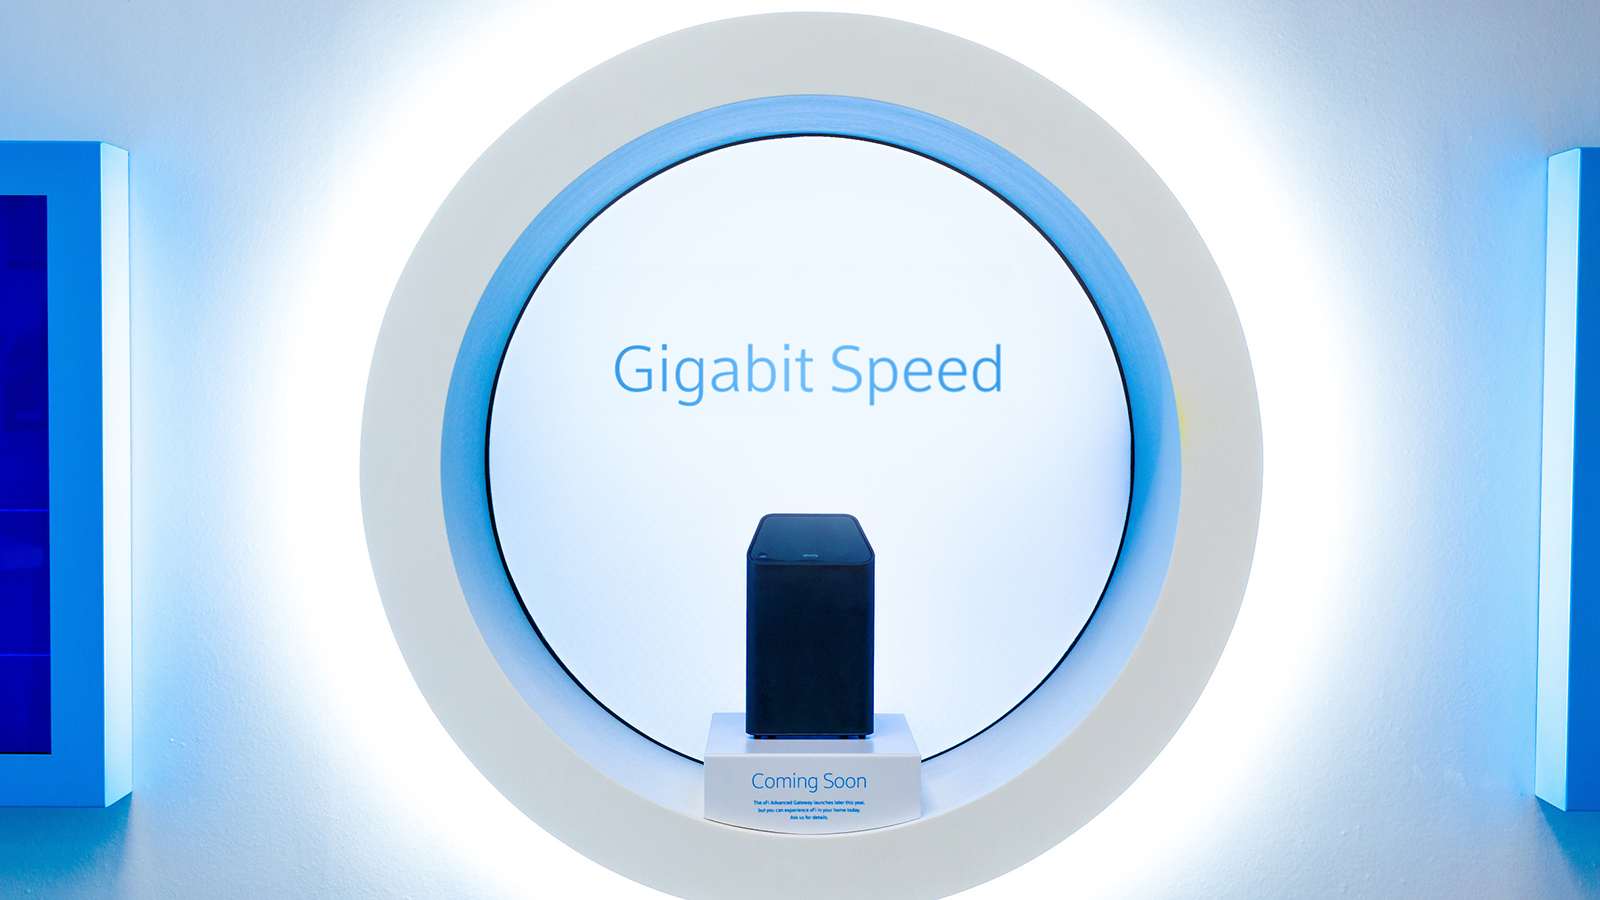 An Xfinity xFi gateway displayed in front of a Gigabit Speed sign.